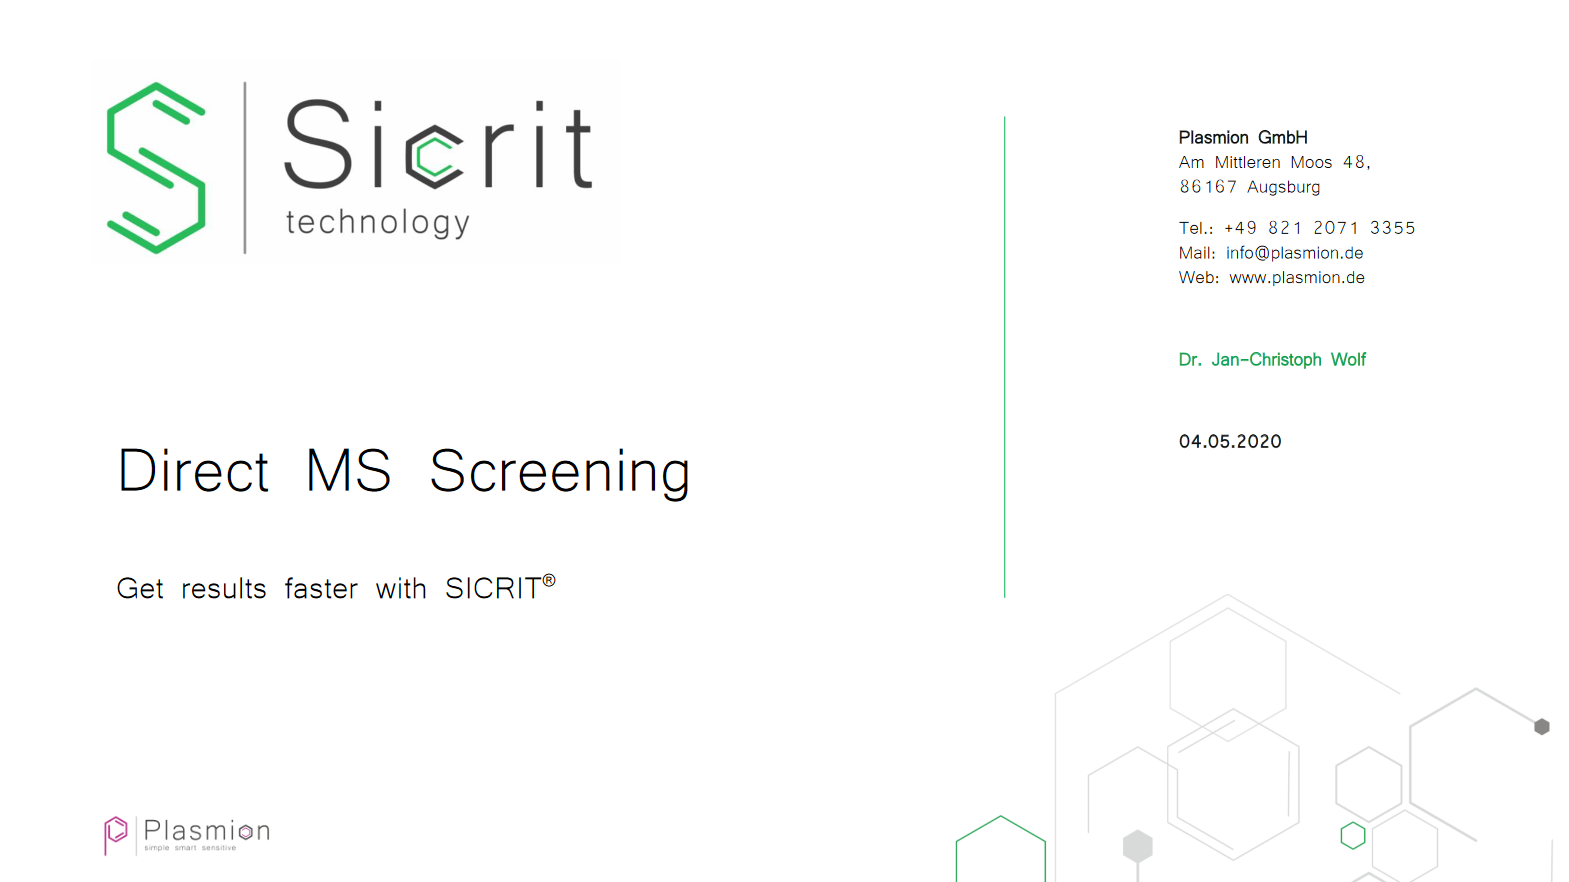 Plasmion: Direct MS Screening - Get Results Faster with SICRIT